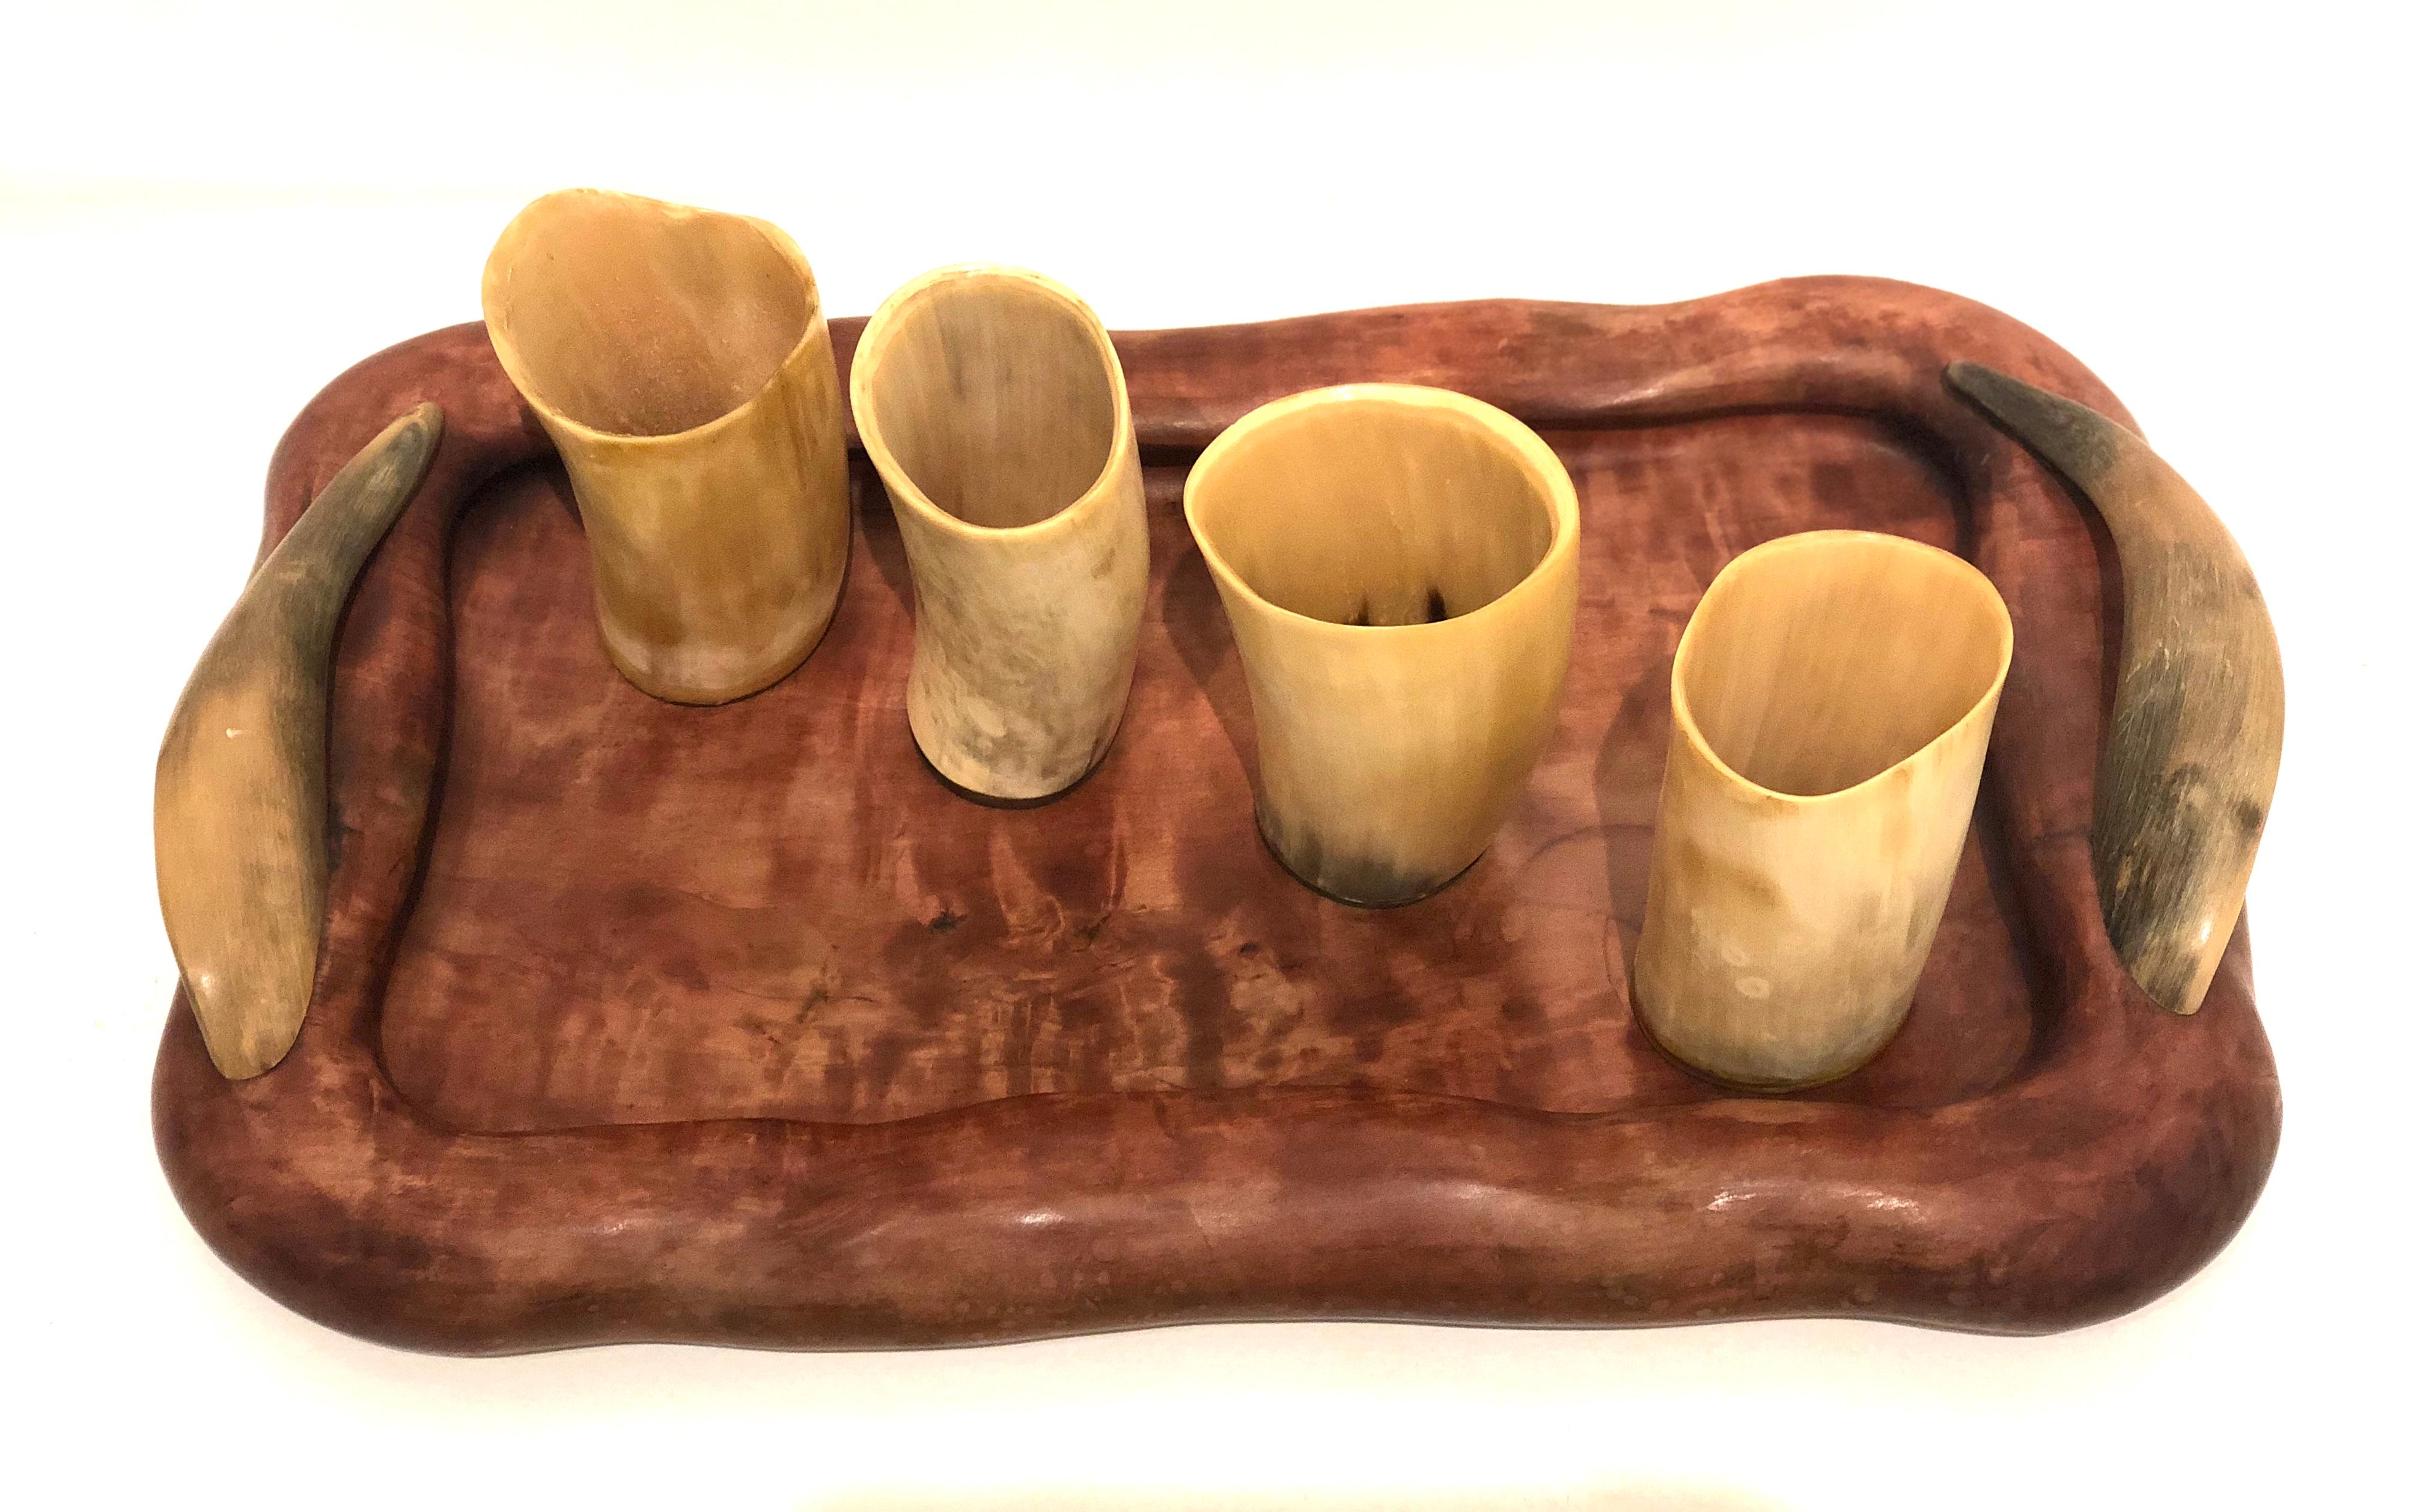 Versatile rare and unique serving tray by French craftsman. Dan Karner stamped at the bottom beautiful wood carved tray with horn handles and 4 horn cups.